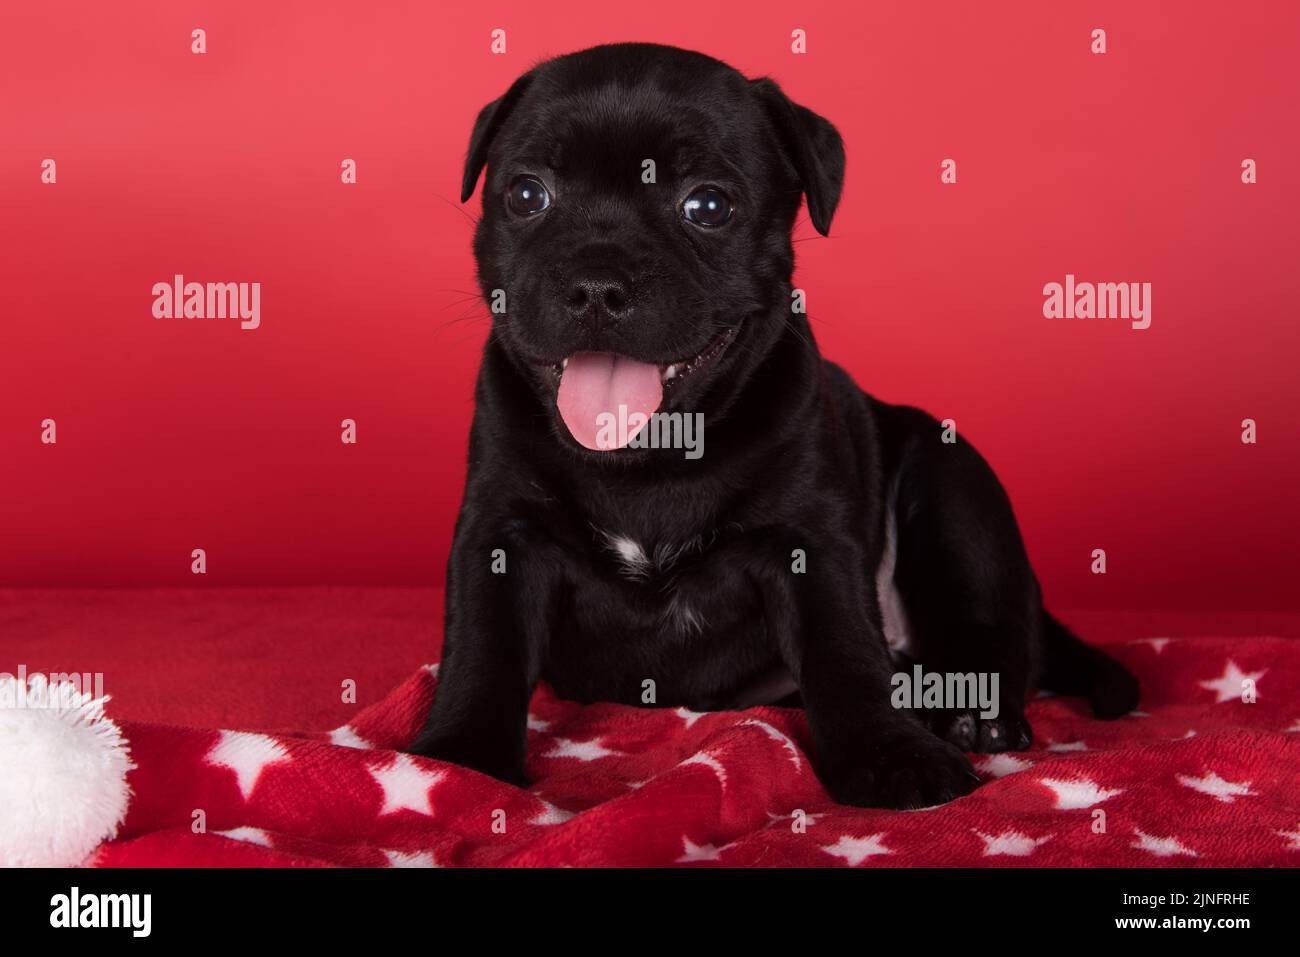 Black female American Staffordshire Bull Terrier dog or AmStaff puppy on red background Stock Photo